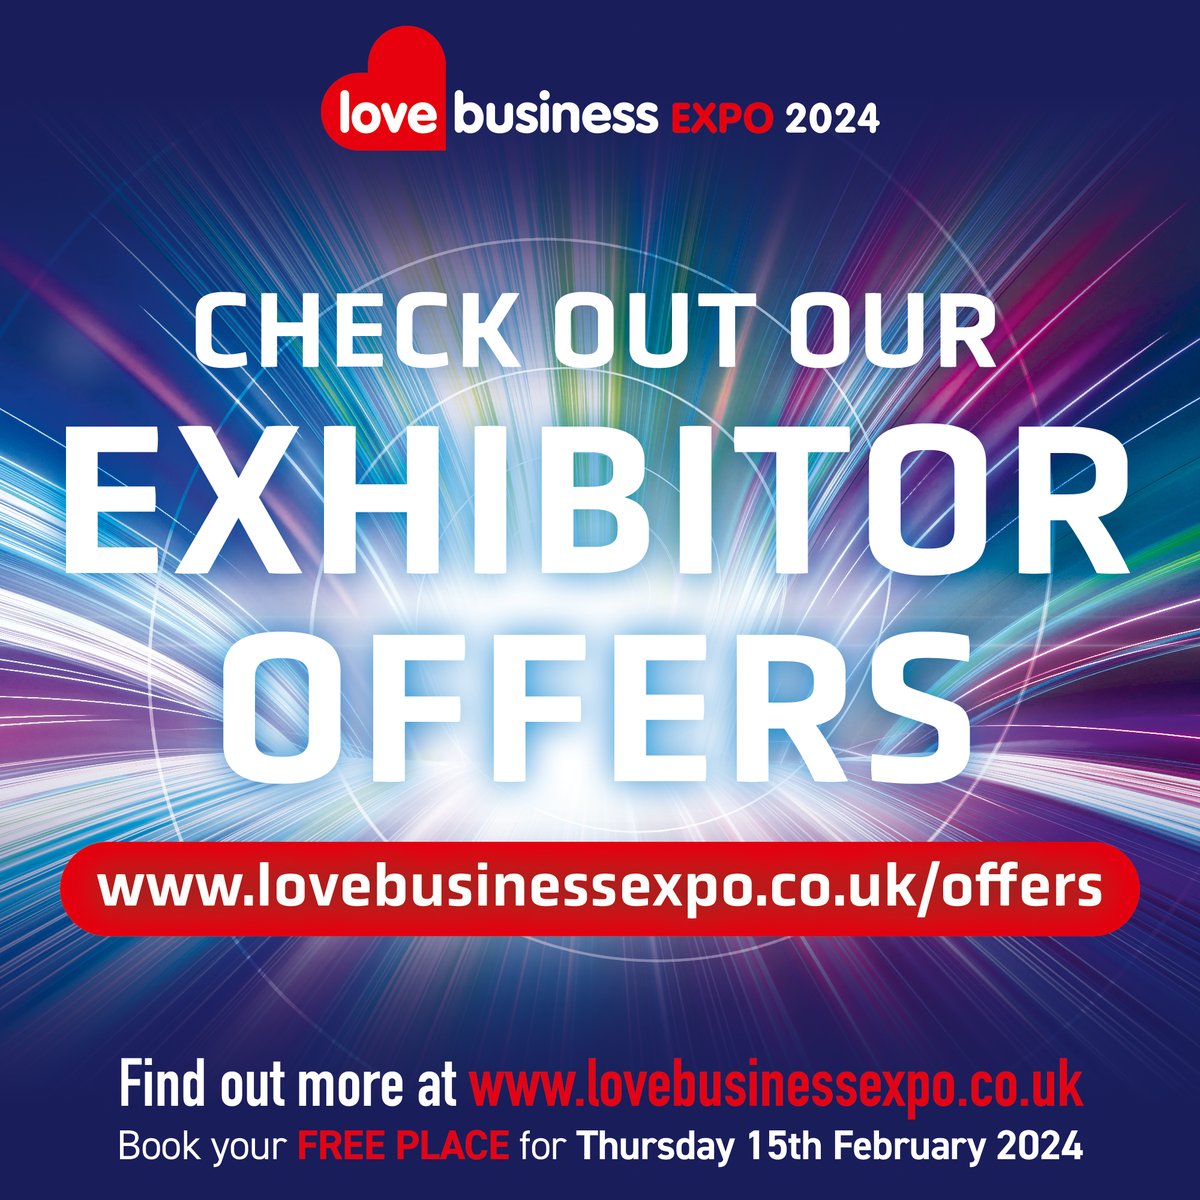 Check out our Exhibitors Offers for Love Business EXPO 2024 at lovebusinessexpo.co.uk/offers/ Book your FREE delegate ticket for Love Business EXPO 2024 at lovebusinessexpo.co.uk #LoveBusinessEXPO #love #business #event #east #midlands #eastmidlands #networking #networkingevent